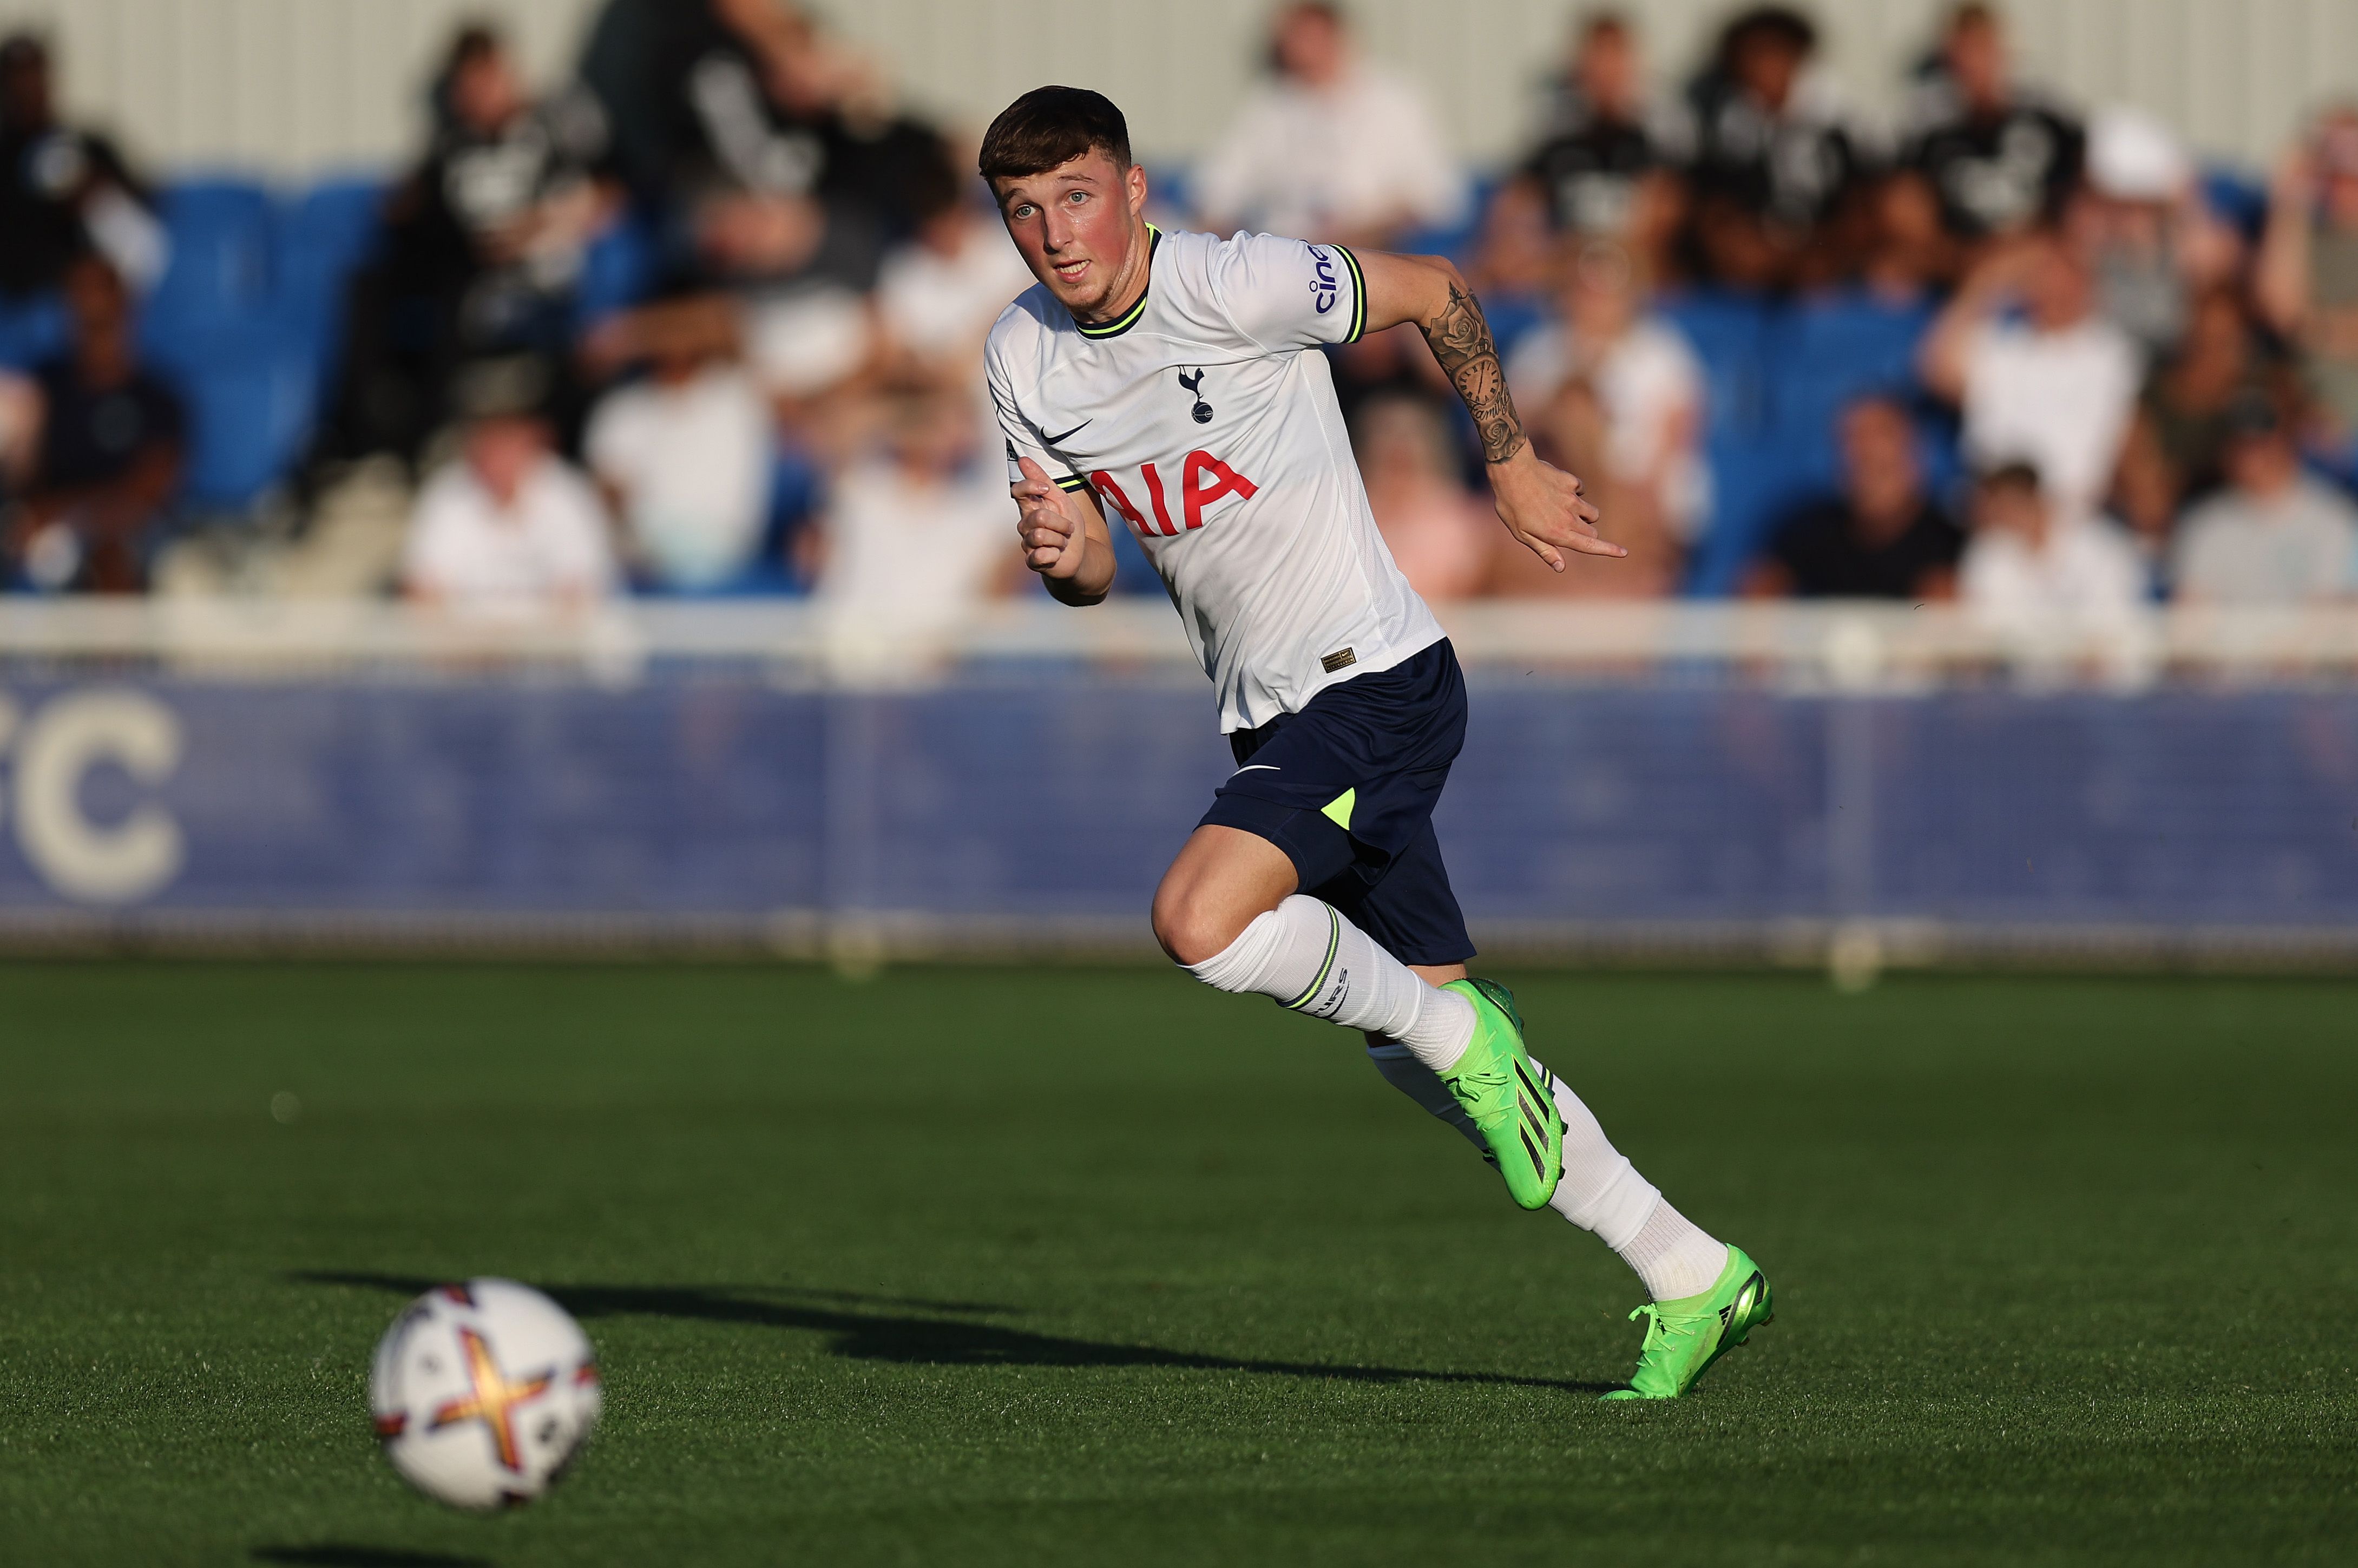 Alfie Devine of Tottenham Hotspur during the Premier League 2 match between Leicester City U23 and Tottenham Hotspur U23 at Leicester City FC Training Ground on August 08, 2022 in Sileby, England.